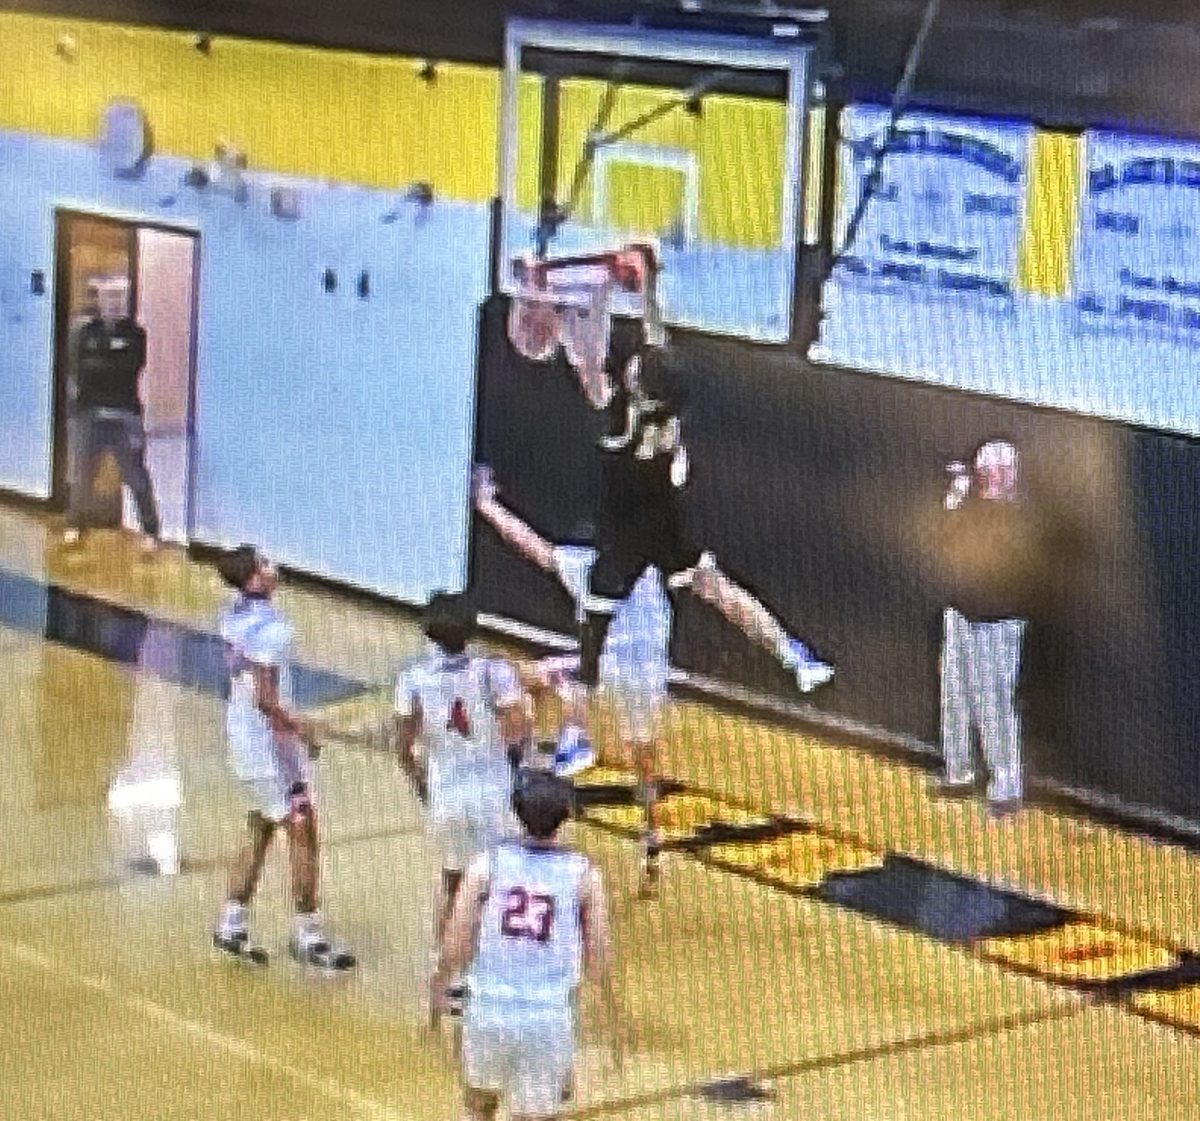 Sean Golden dunks over an opponent helping seal the overtime win.